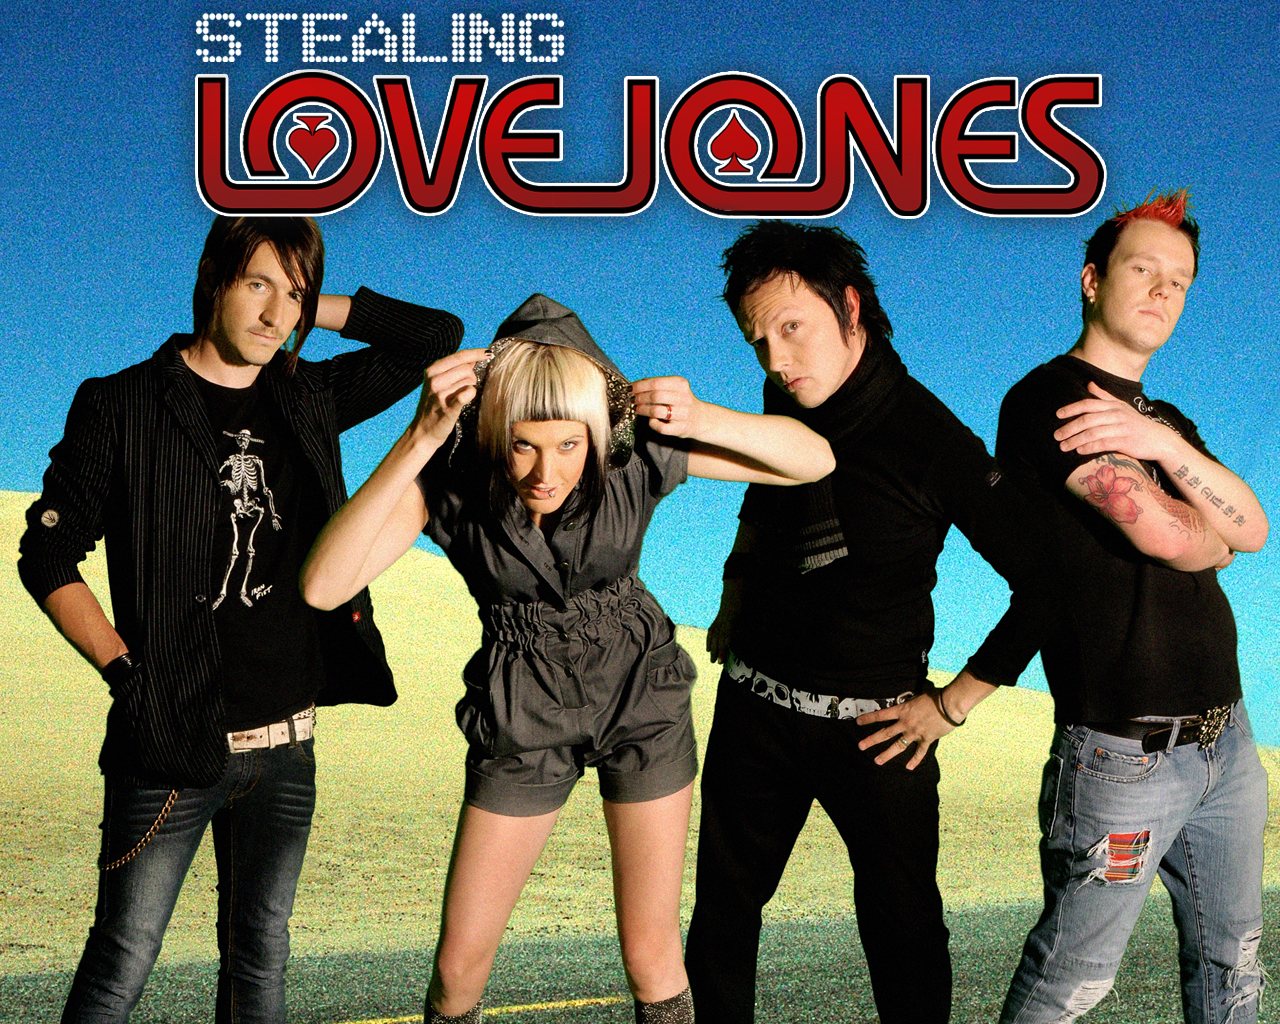 Stealing Love Jones is a pop-rock band from Durban, South Africa, formed in...